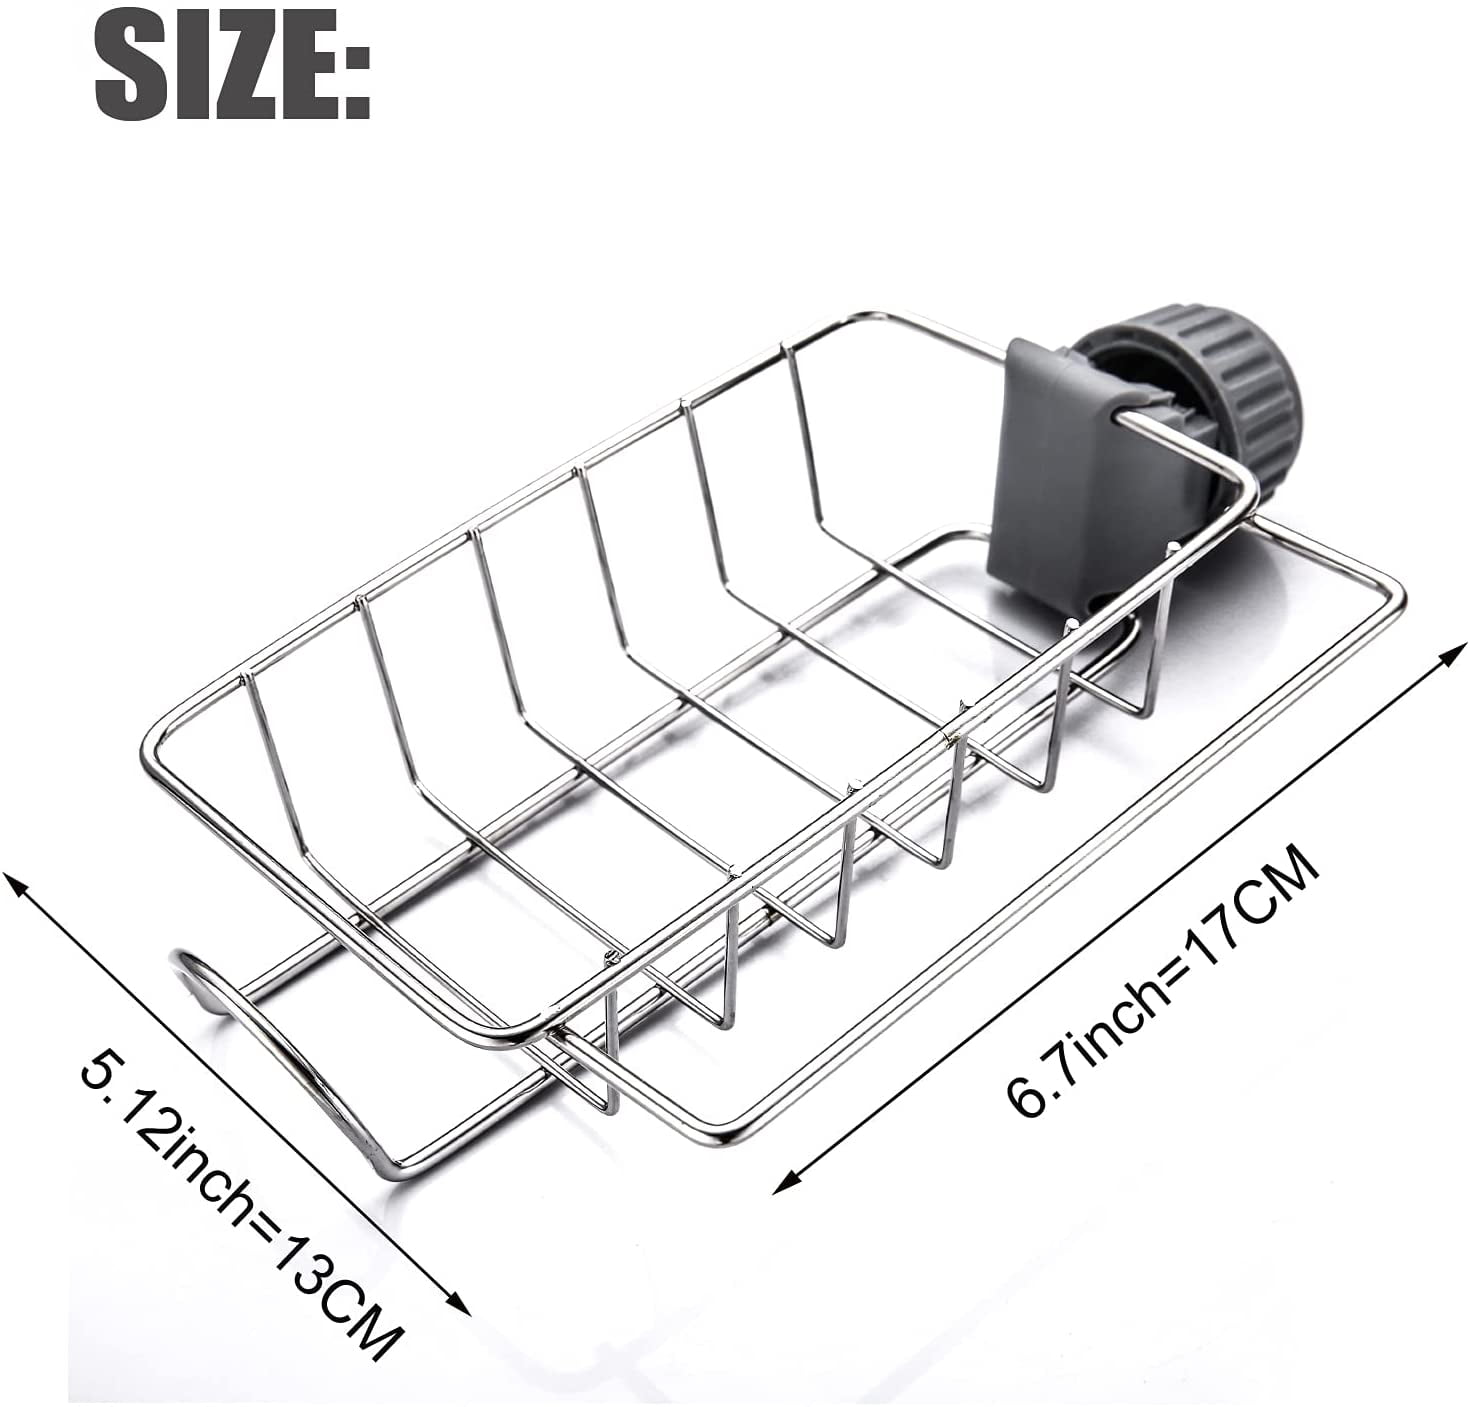 LIGHTSMAX Sink Caddy Organizer,Kitchen Faucet Sponge Holder, Drainer Caddy  for Dish Washing, Stainless Steel Faucet Storage Rack Hanging, Shelf Soap  Sponge Storage Rack, Holder Faucet Sponge Hanging in the Sink Caddies  department